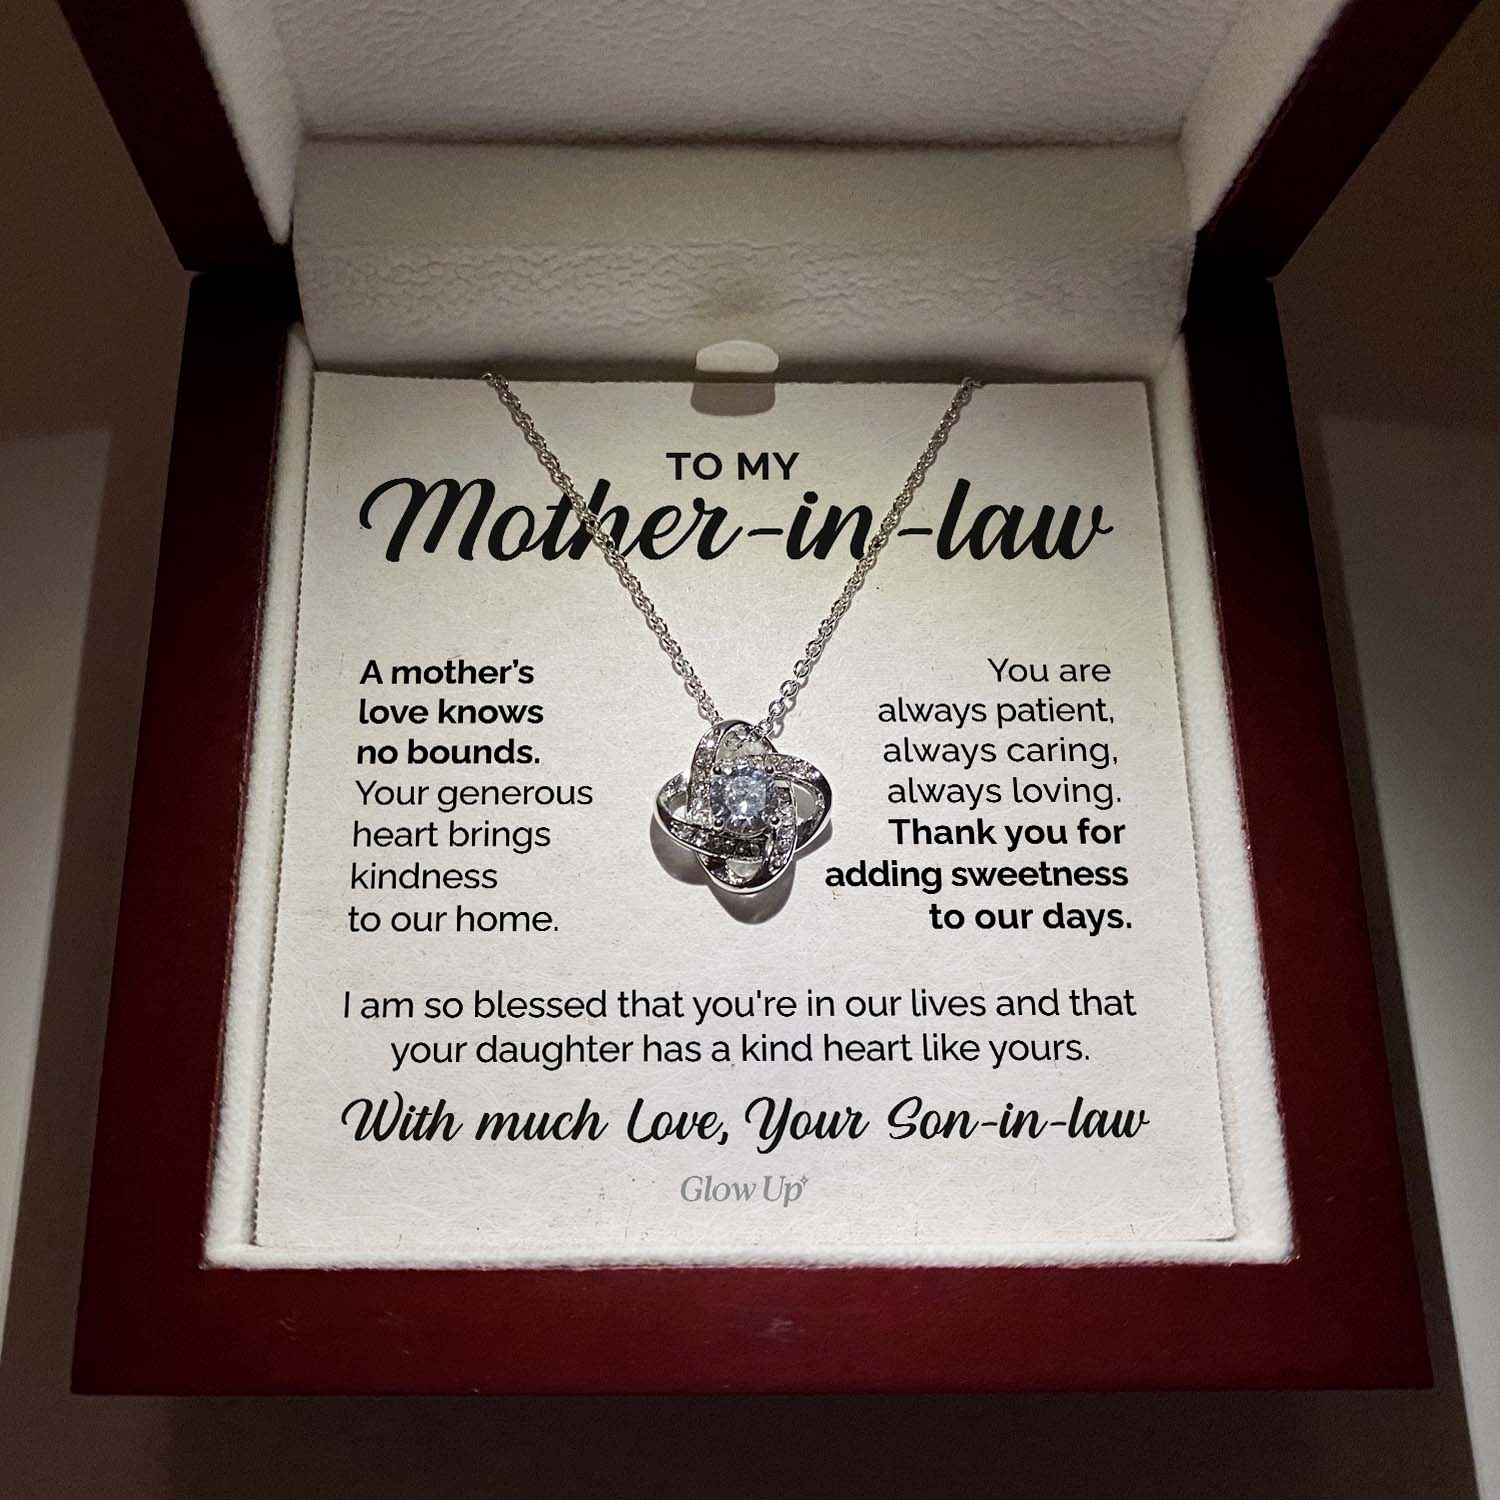 ShineOn Fulfillment Jewelry Mahogany Style Luxury Box (w/LED) To my Mother-in-law - A mother's love knows no bounds - Love Knot Necklace